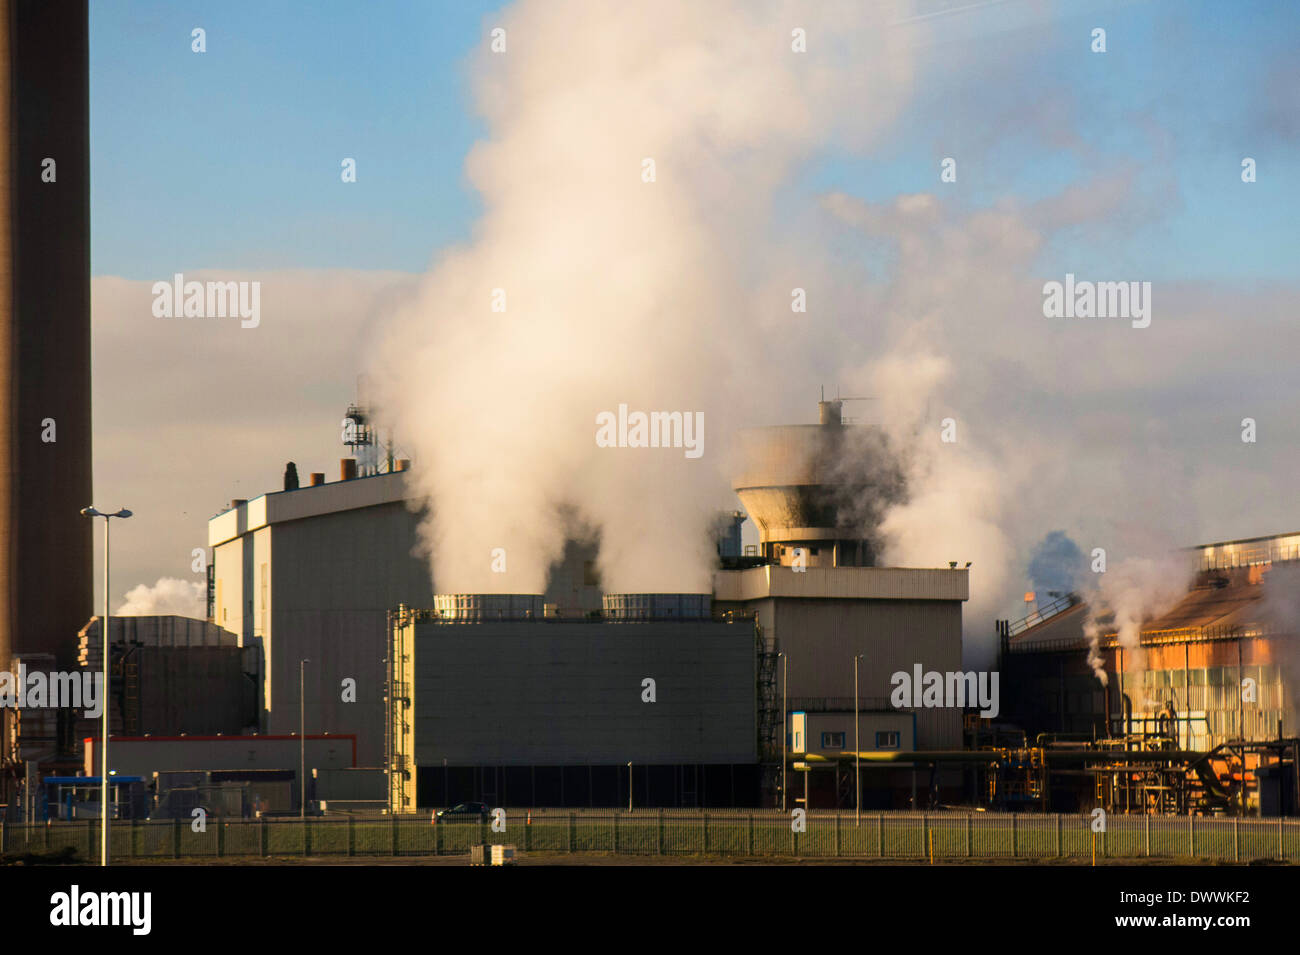 View of a steel manufacturing industrial site Stock Photo